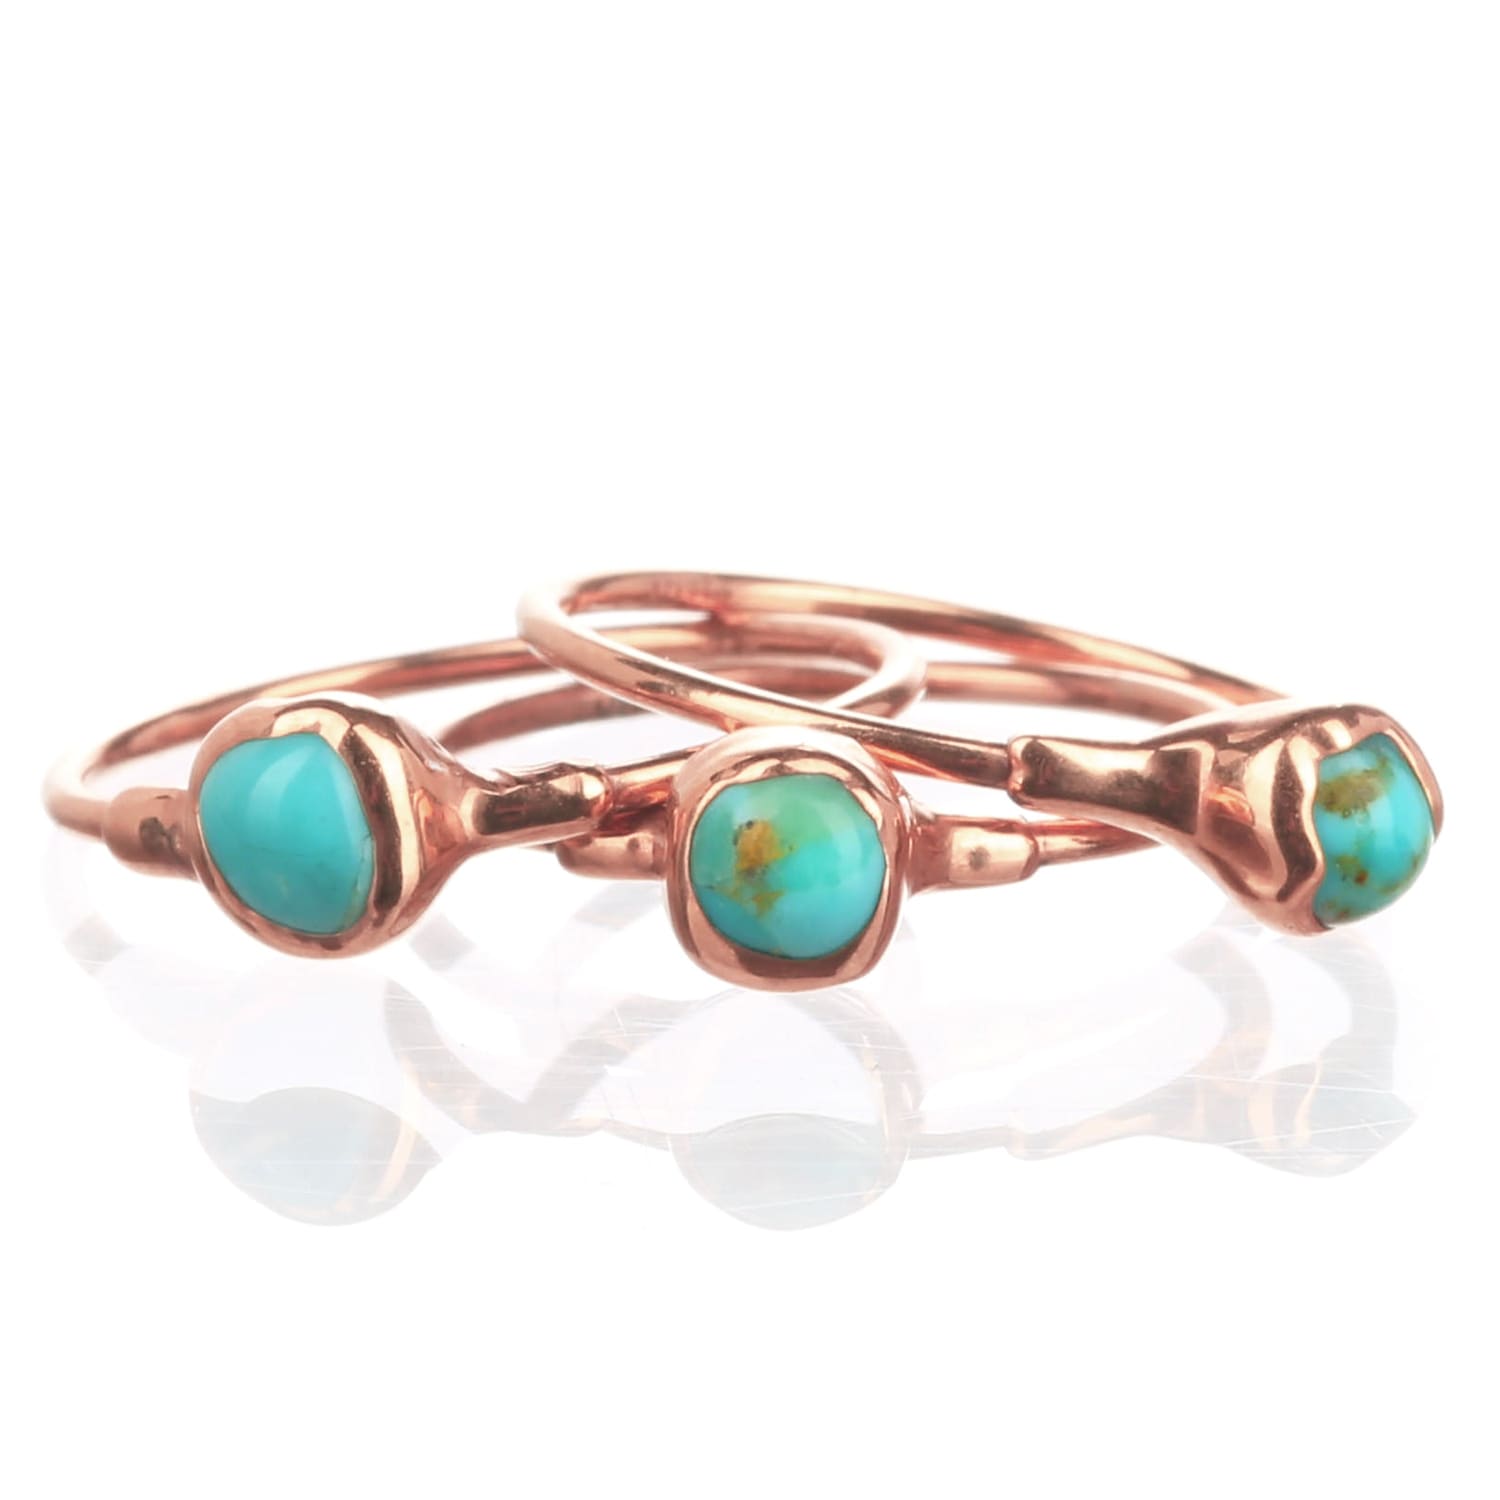 Dainty Raw Turquoise Ring in Rose Gold Gemstone Jewelry